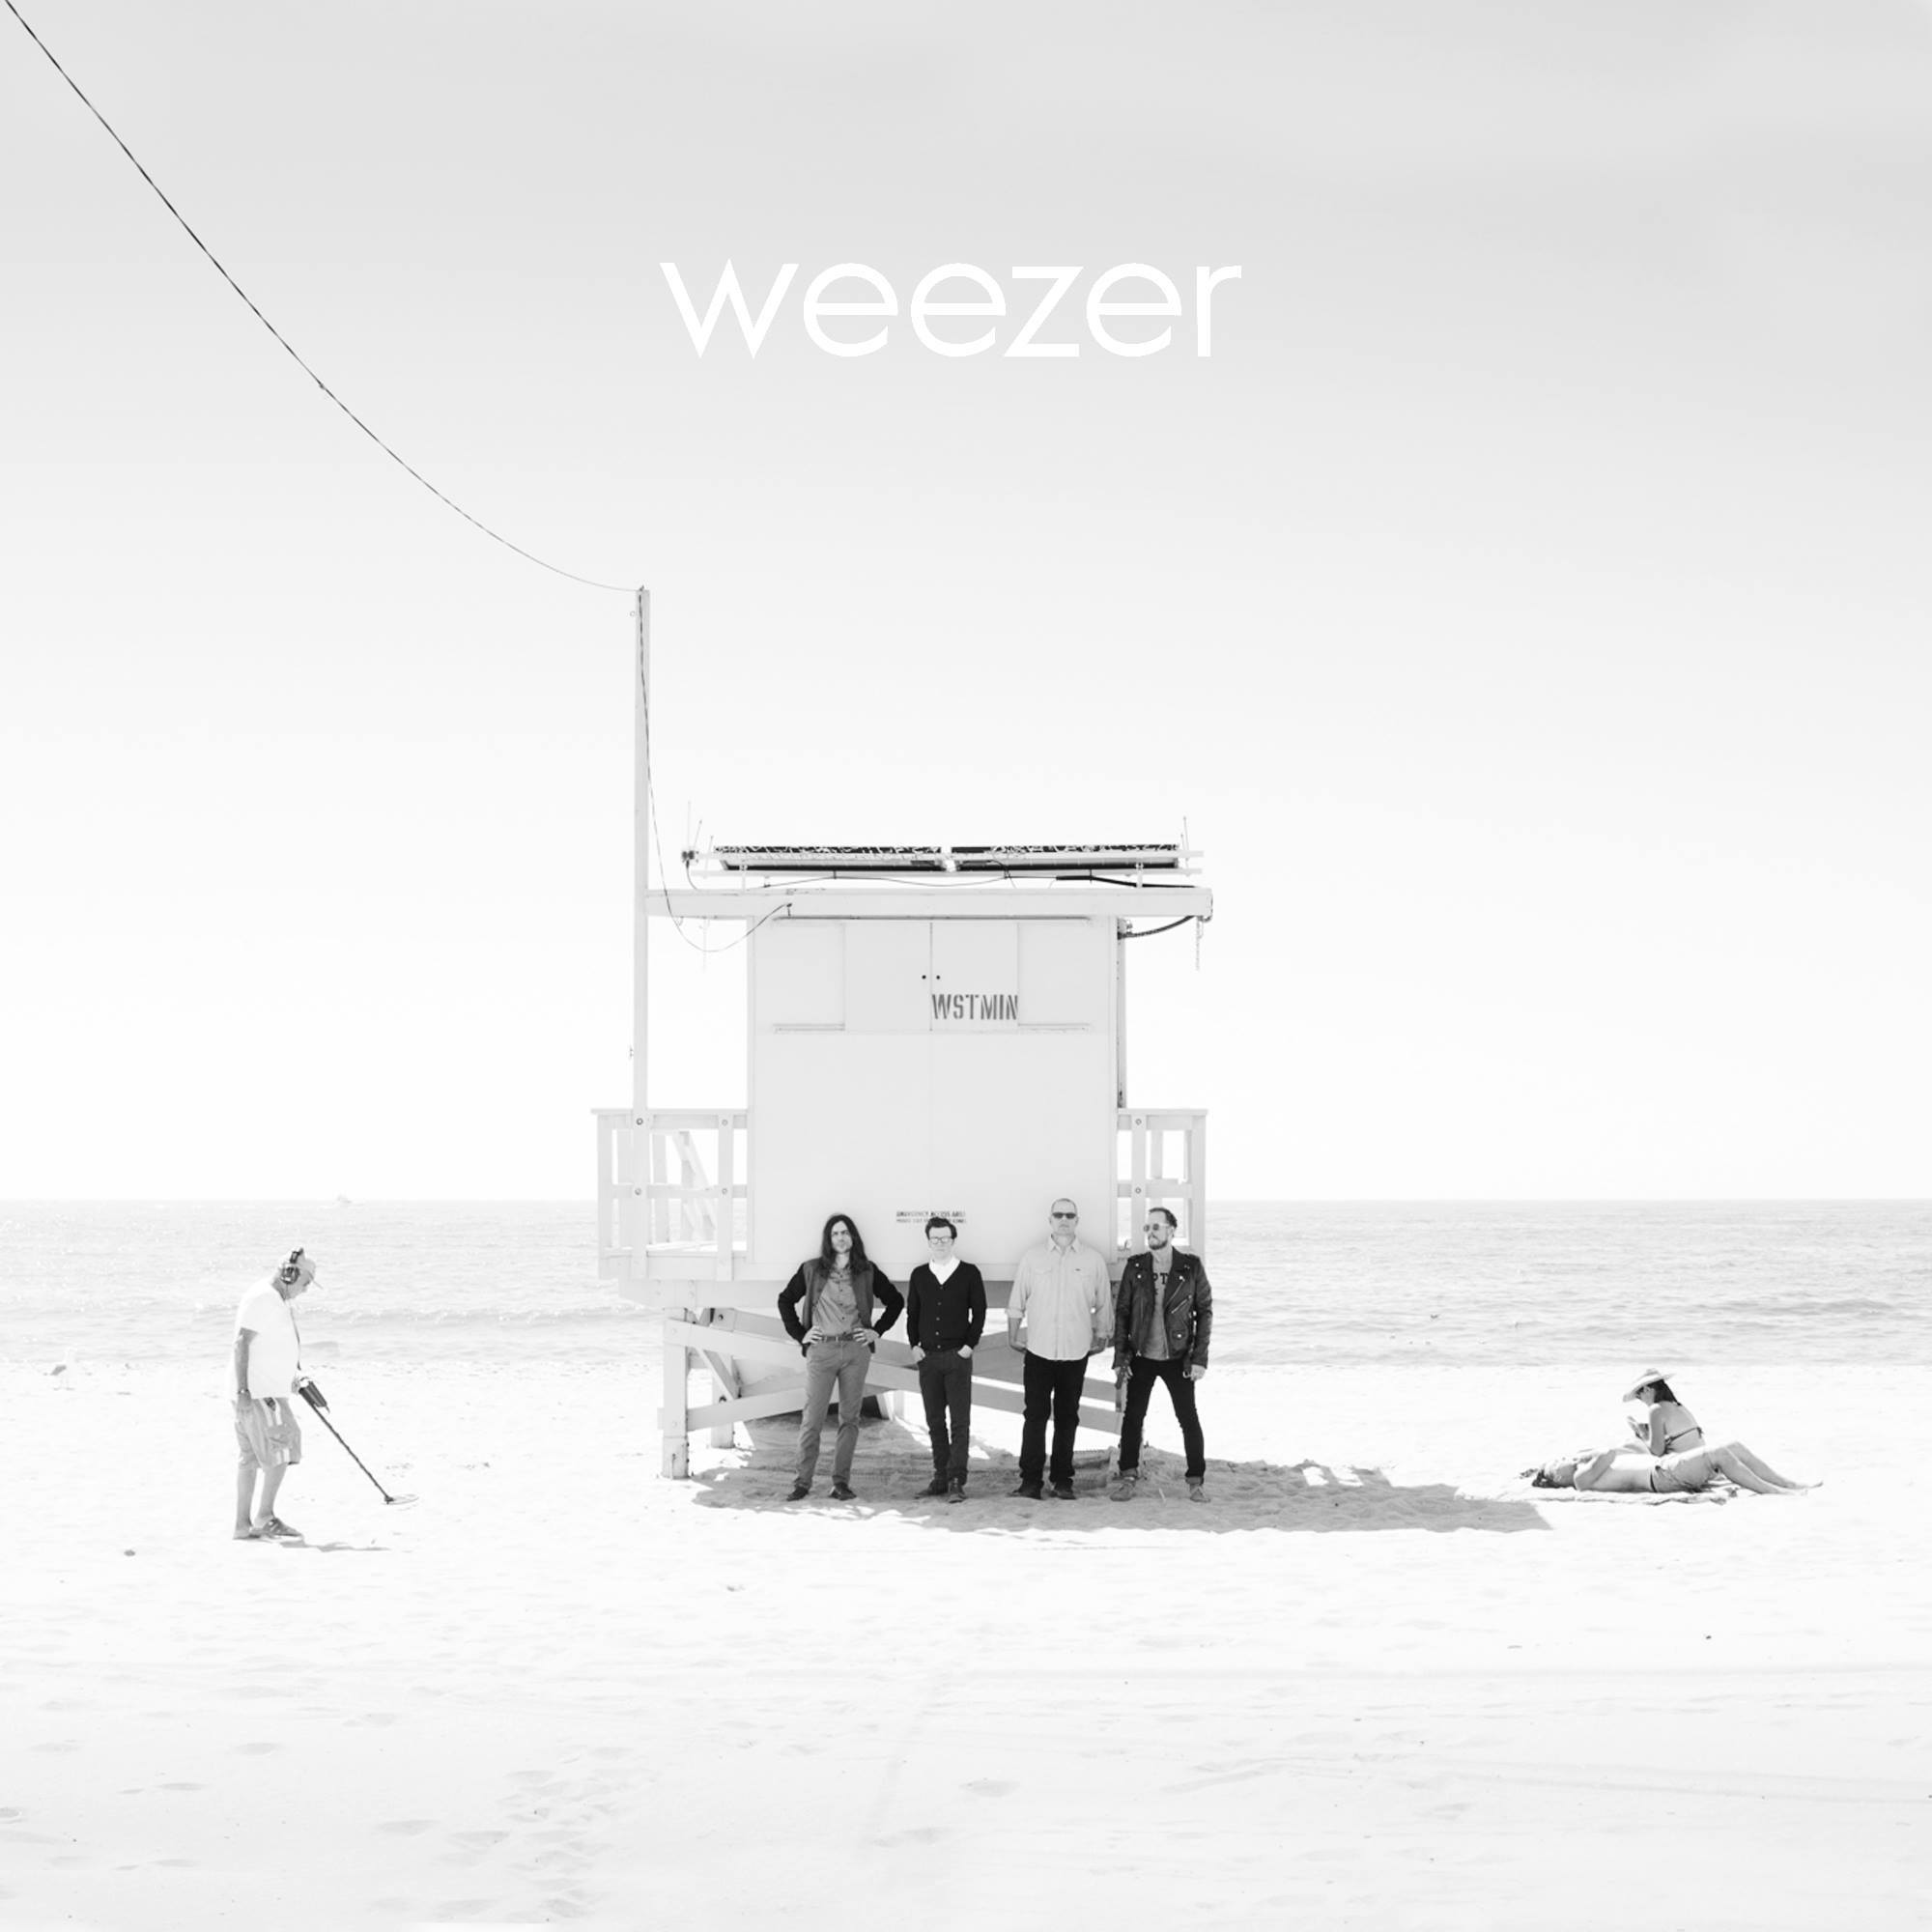 Thoughts on Weezer’s New Summer “Session” Album